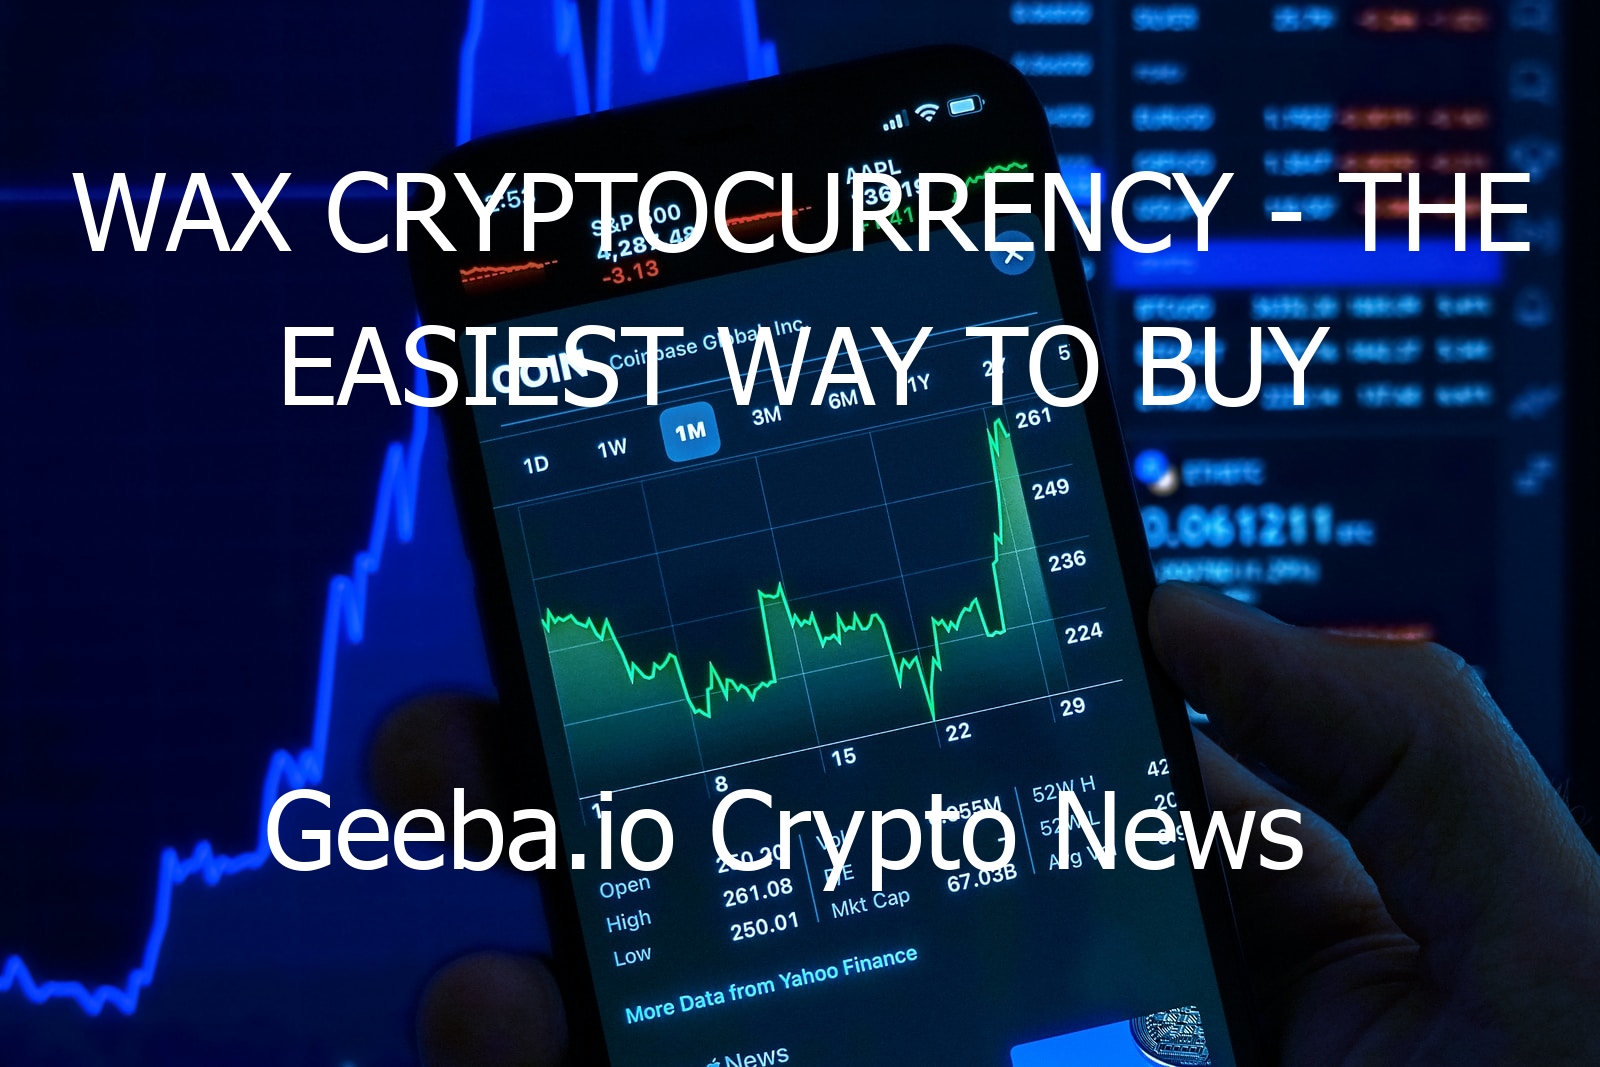 wax cryptocurrency the easiest way to buy 2459